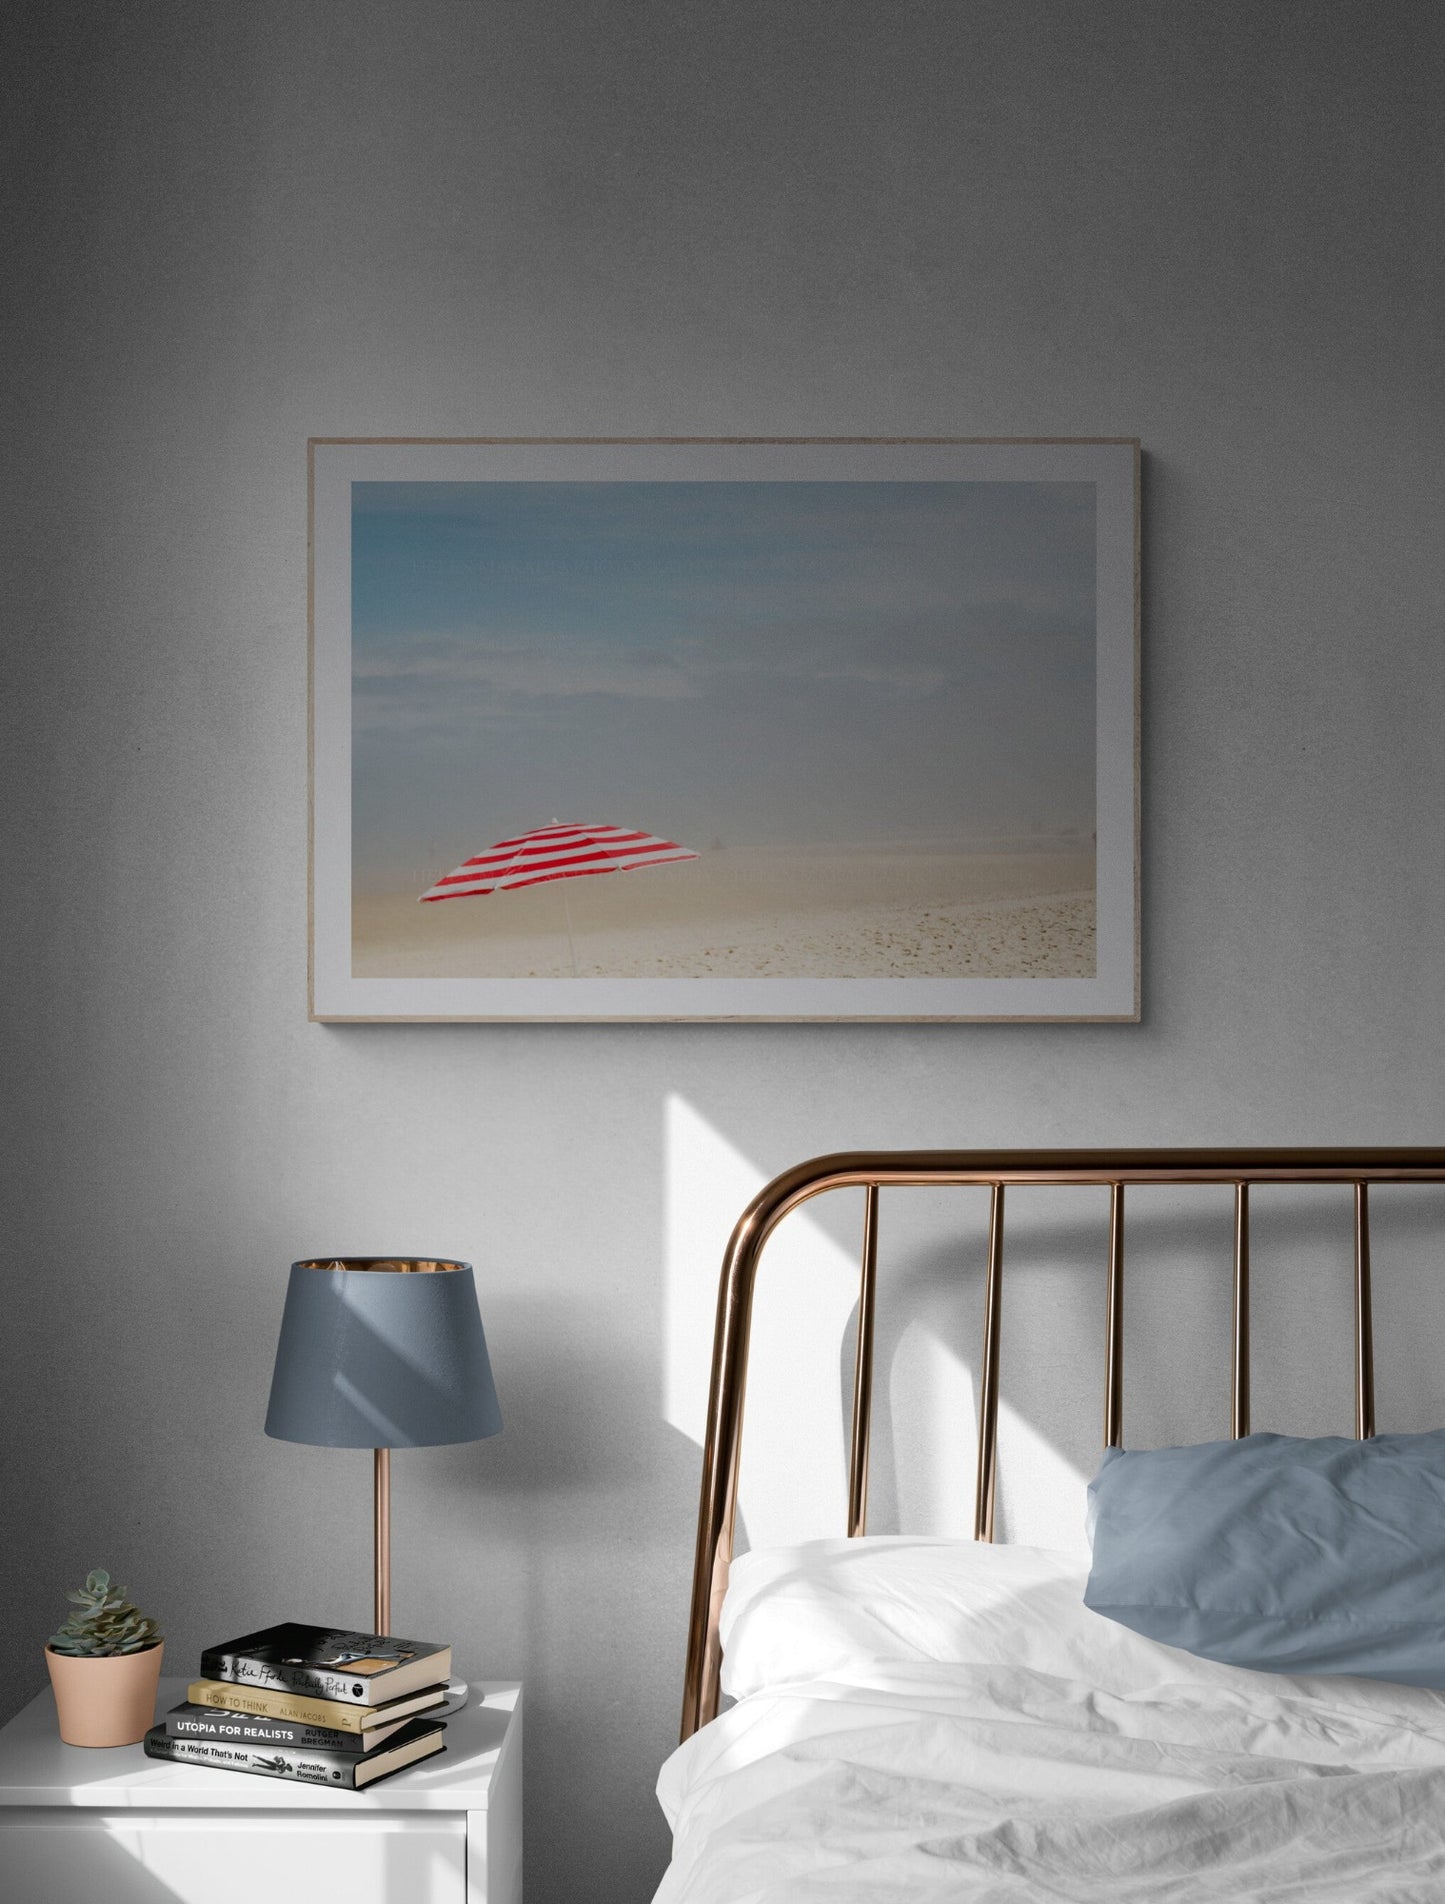 Red and white beach umbrella photograph as bedroom wall art